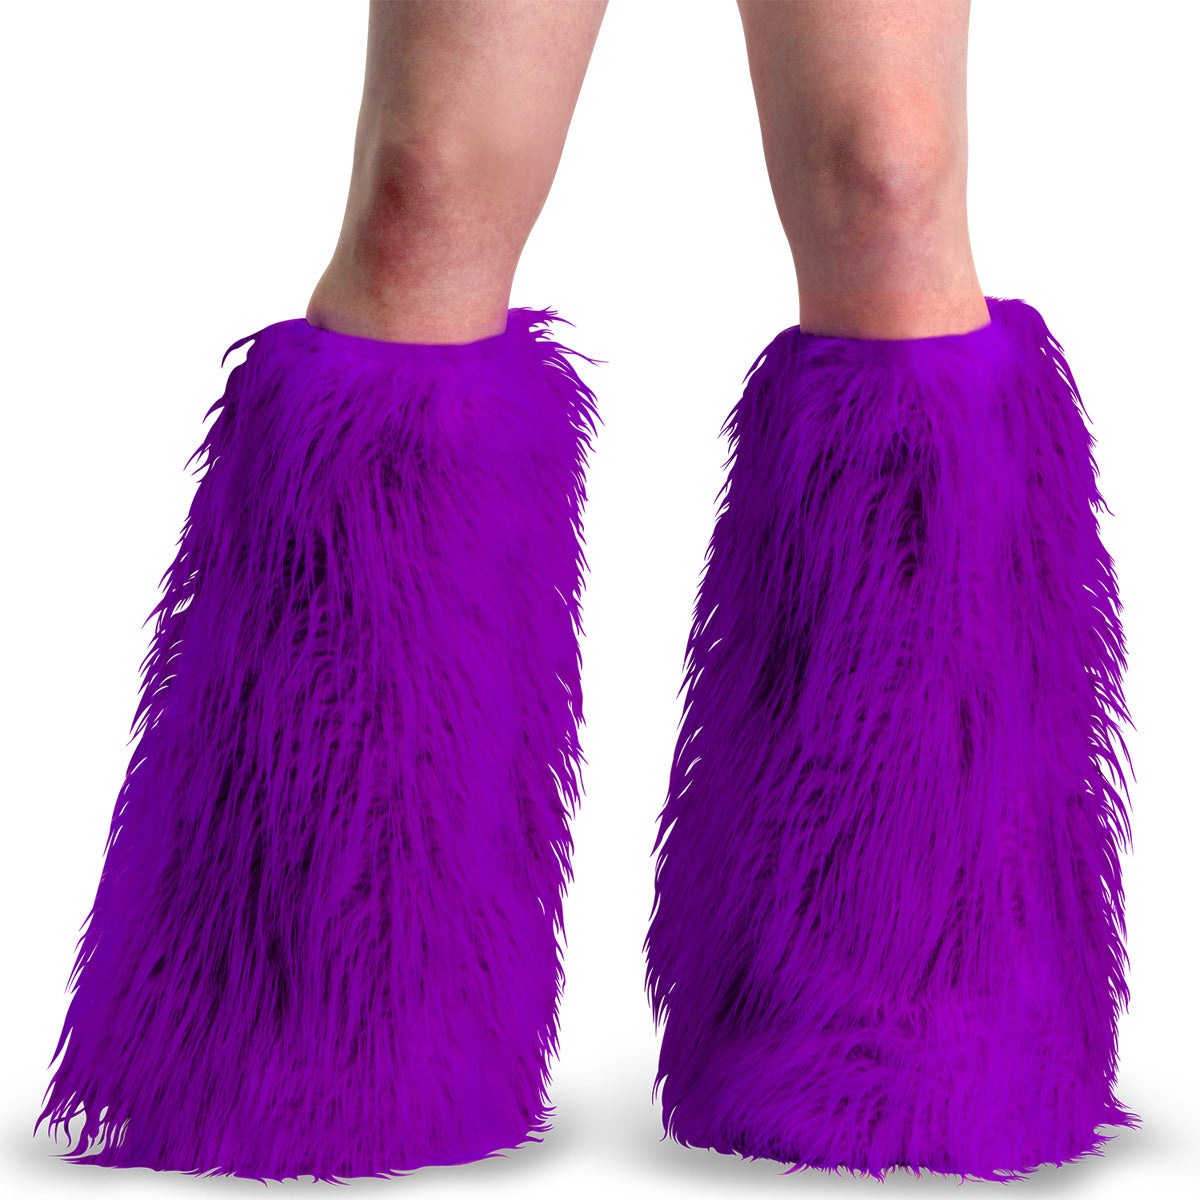 Faux Fur Boot Covers